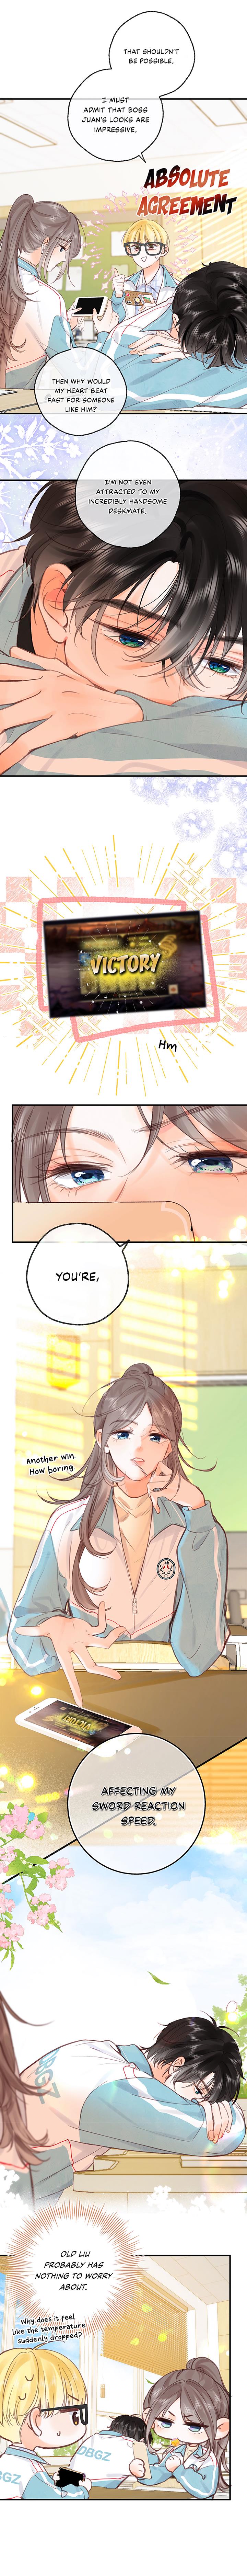 You Are My Desire - Page 3